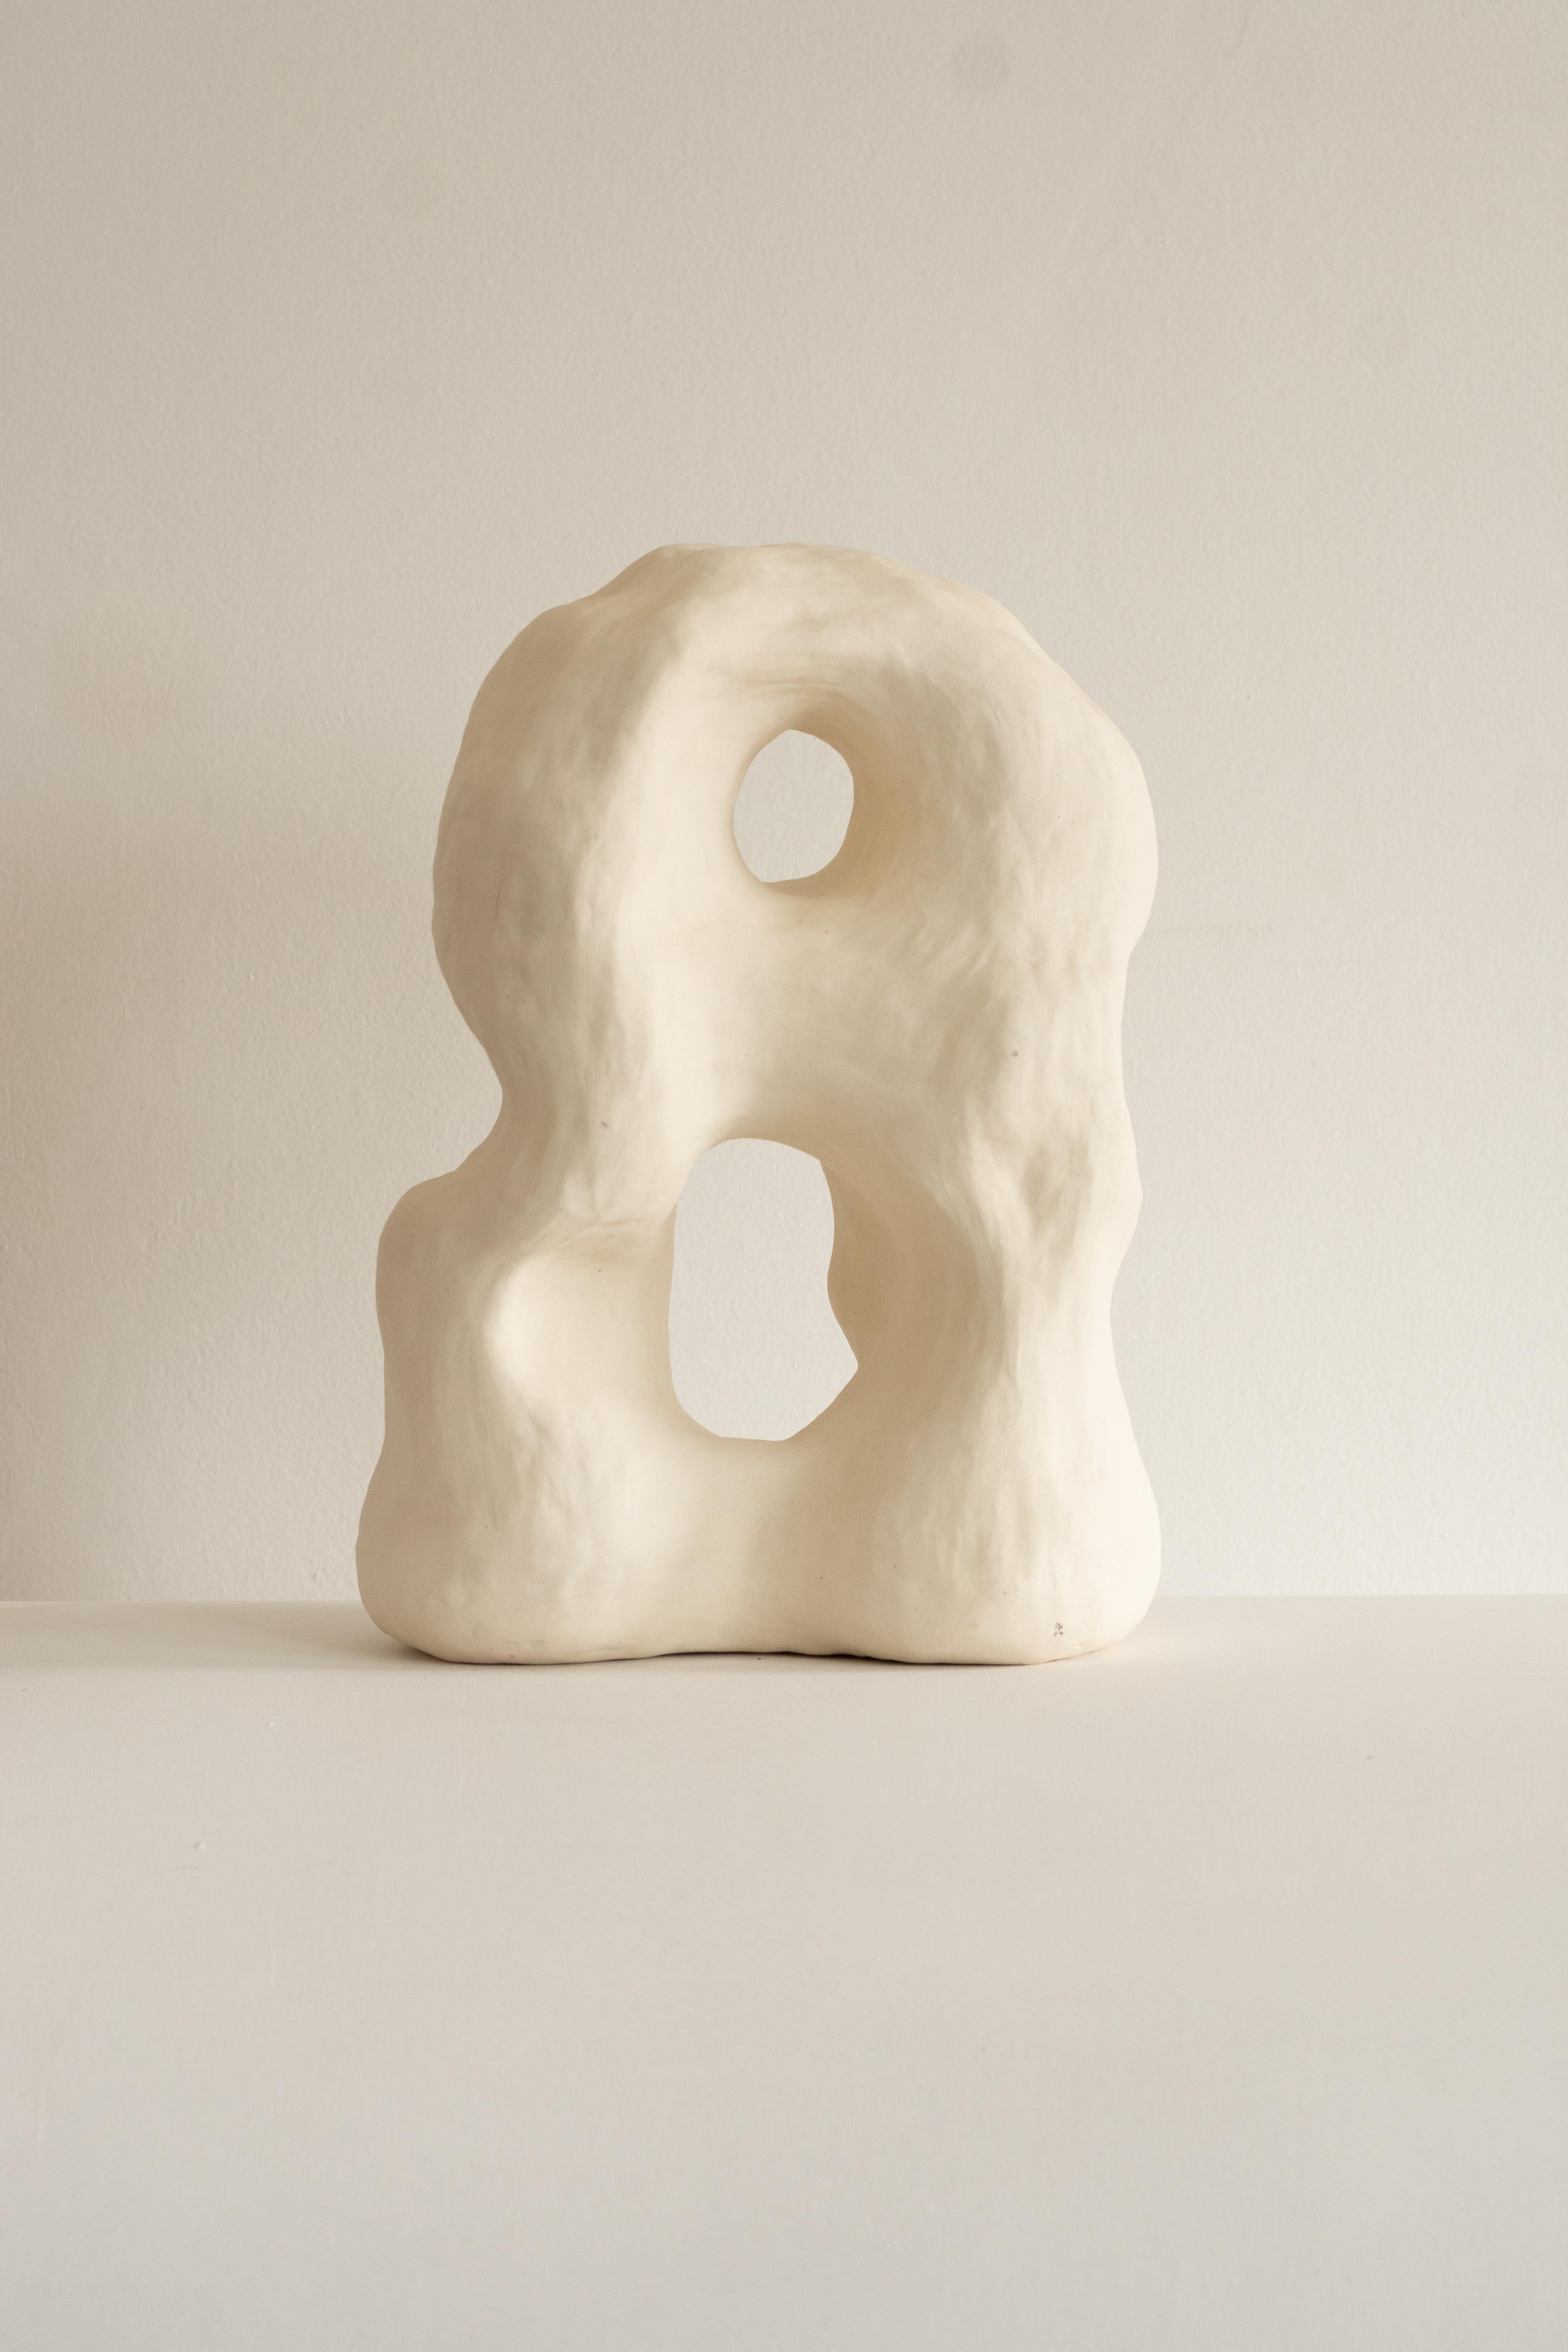 This sculpture is part of the Rupa series, a collection of handcrafted pieces crafted without molds that absorb the contours and textures of the craftsman's hand, transforming it into an object with a clean and complex shape.

The sculpture N.1 are